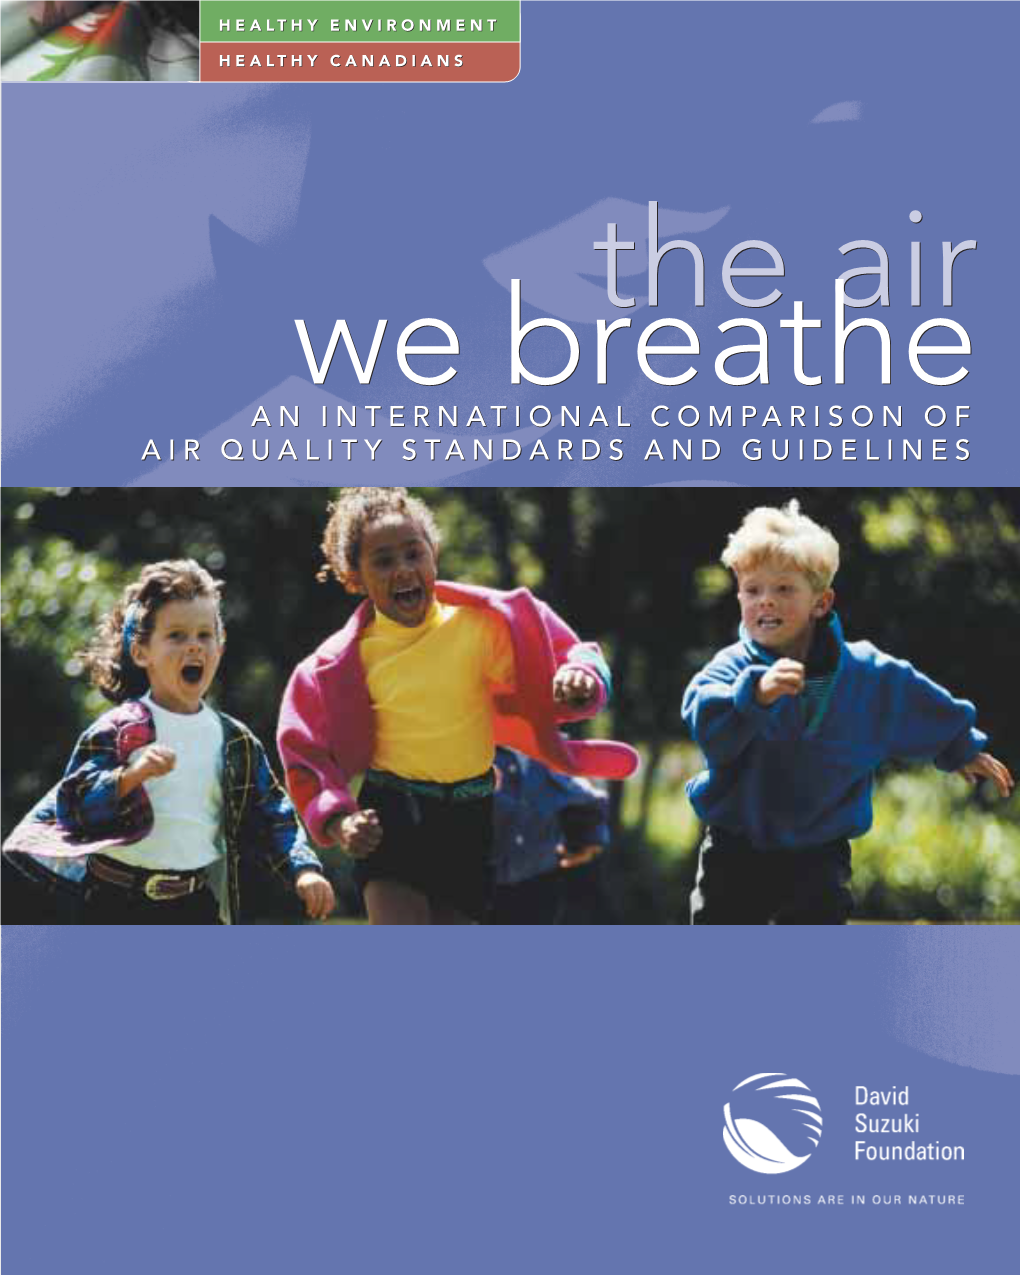 An International Comparison of Air Quality Standards and Guidelines